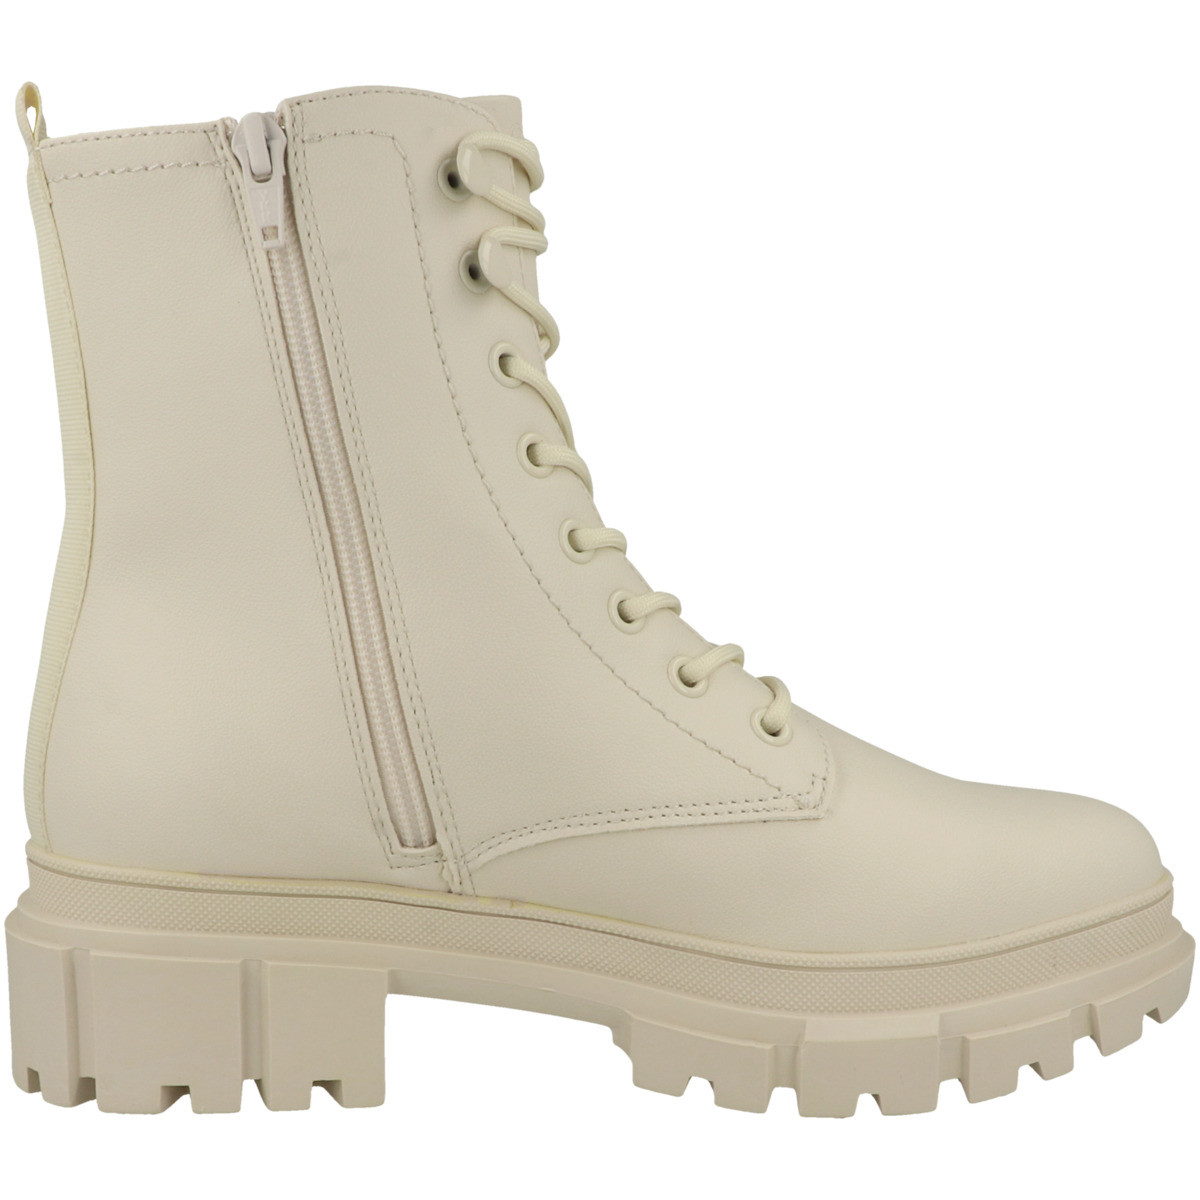 s.Oliver 5-25214-41 Boots creme